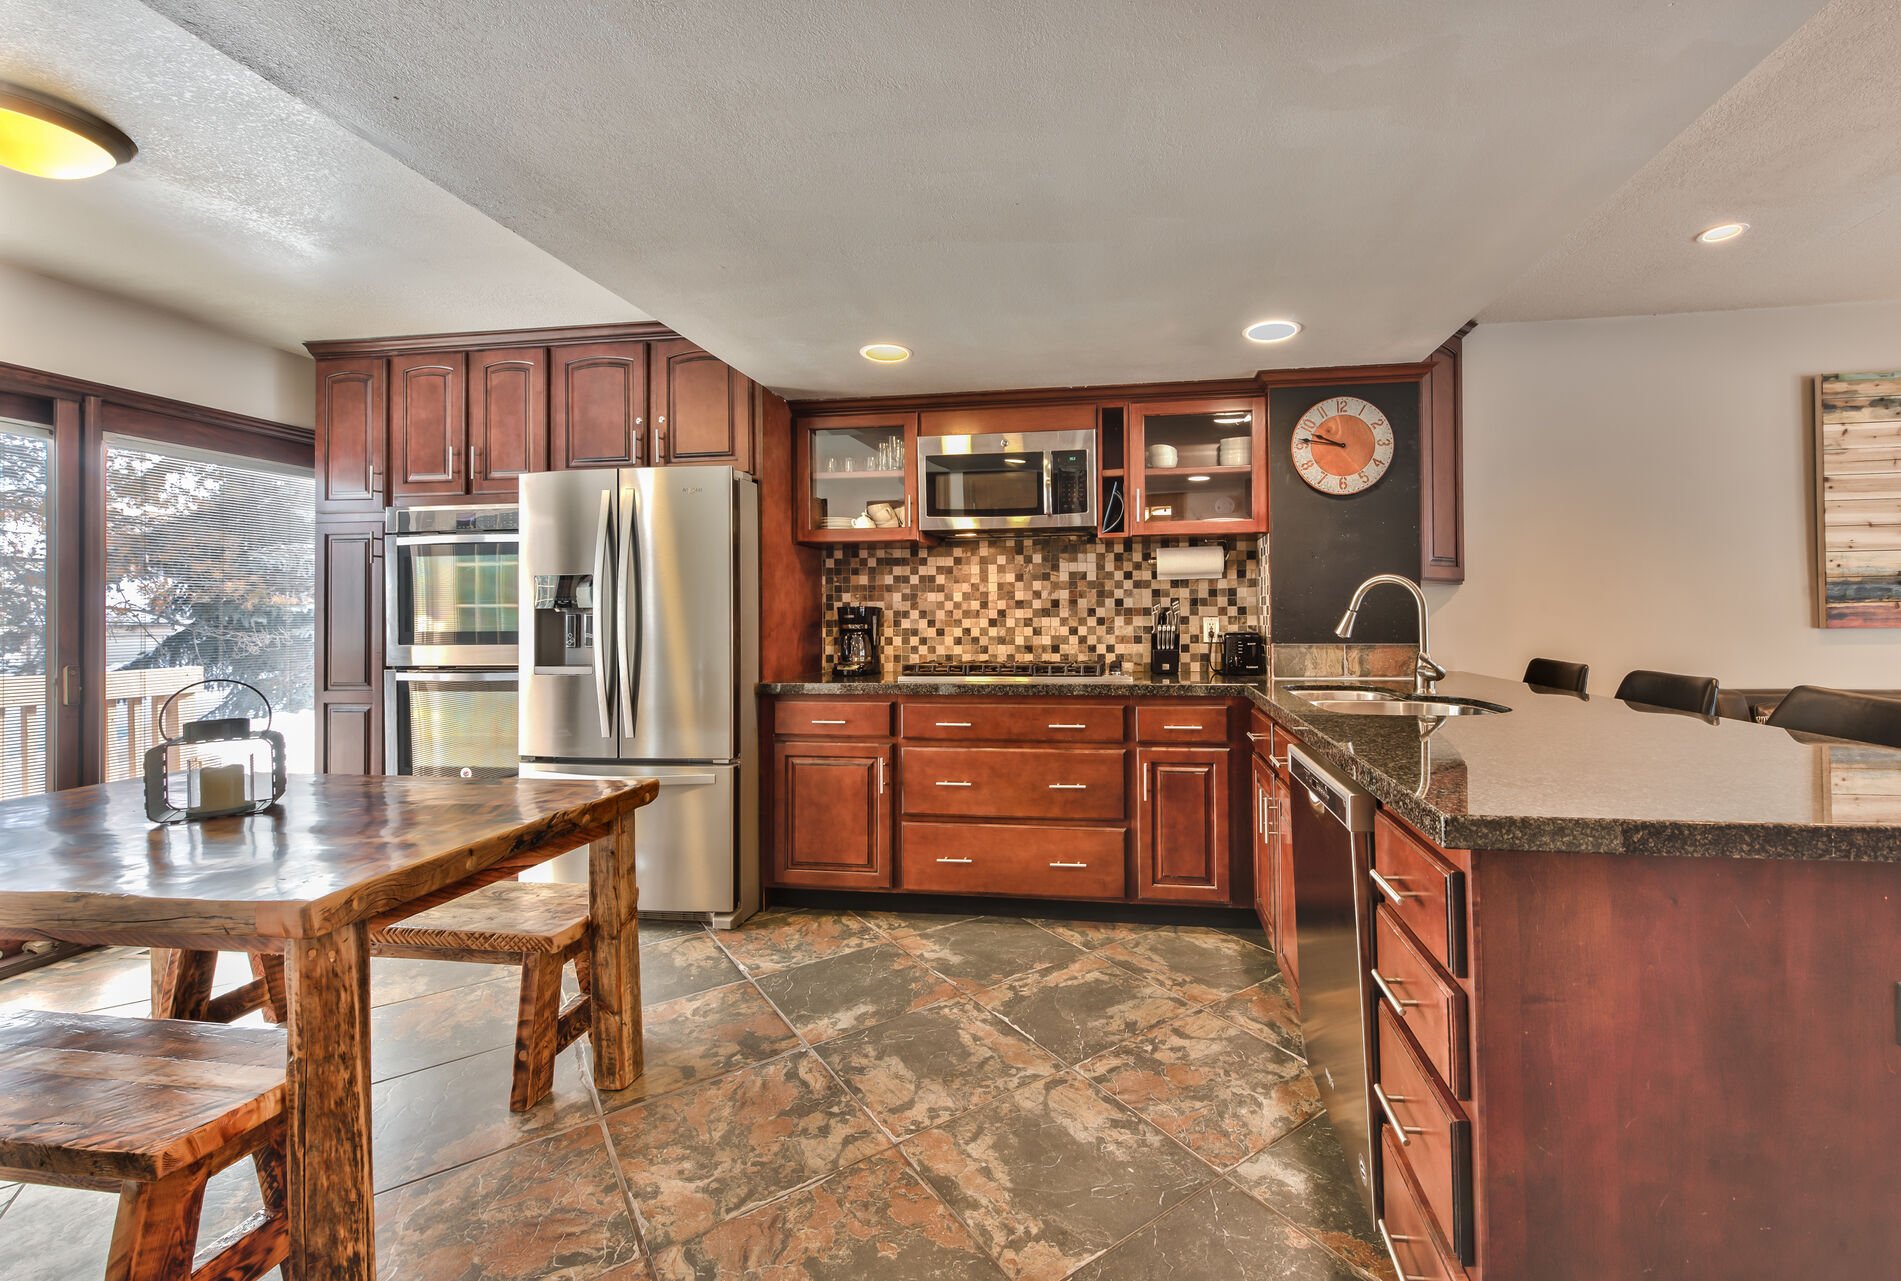 Fully Equipped Kitchen with New Stainless Steel Appliances and Granite Counters, and Dining Table with Bench Seating